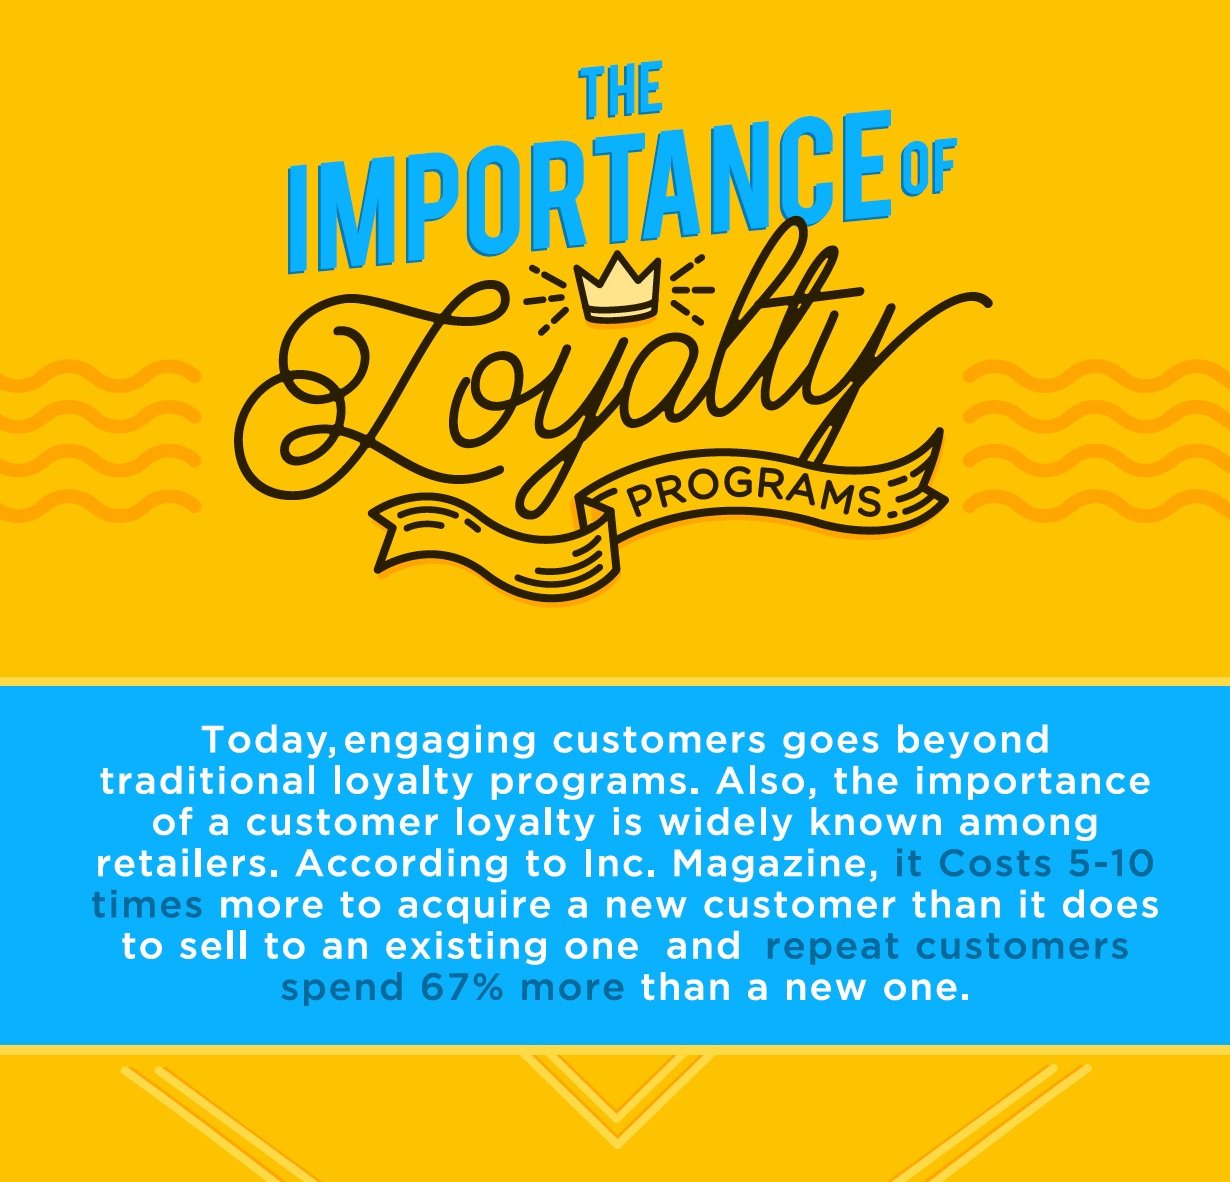 Infographic_The importance of loyalty programs_EN.png